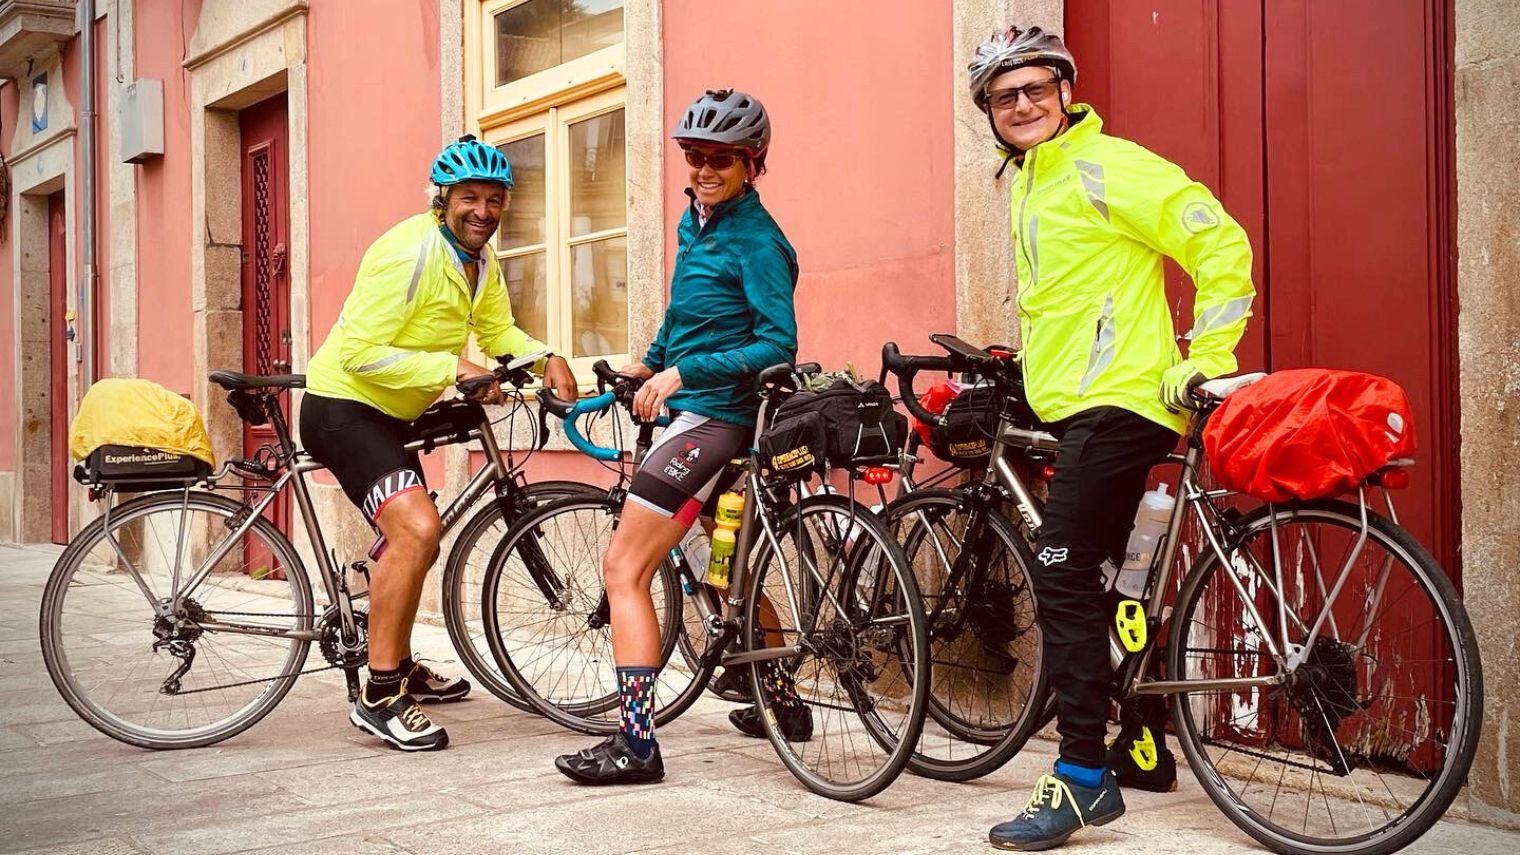 A classic style bicycle tour with ExperiencePlus is fully supported